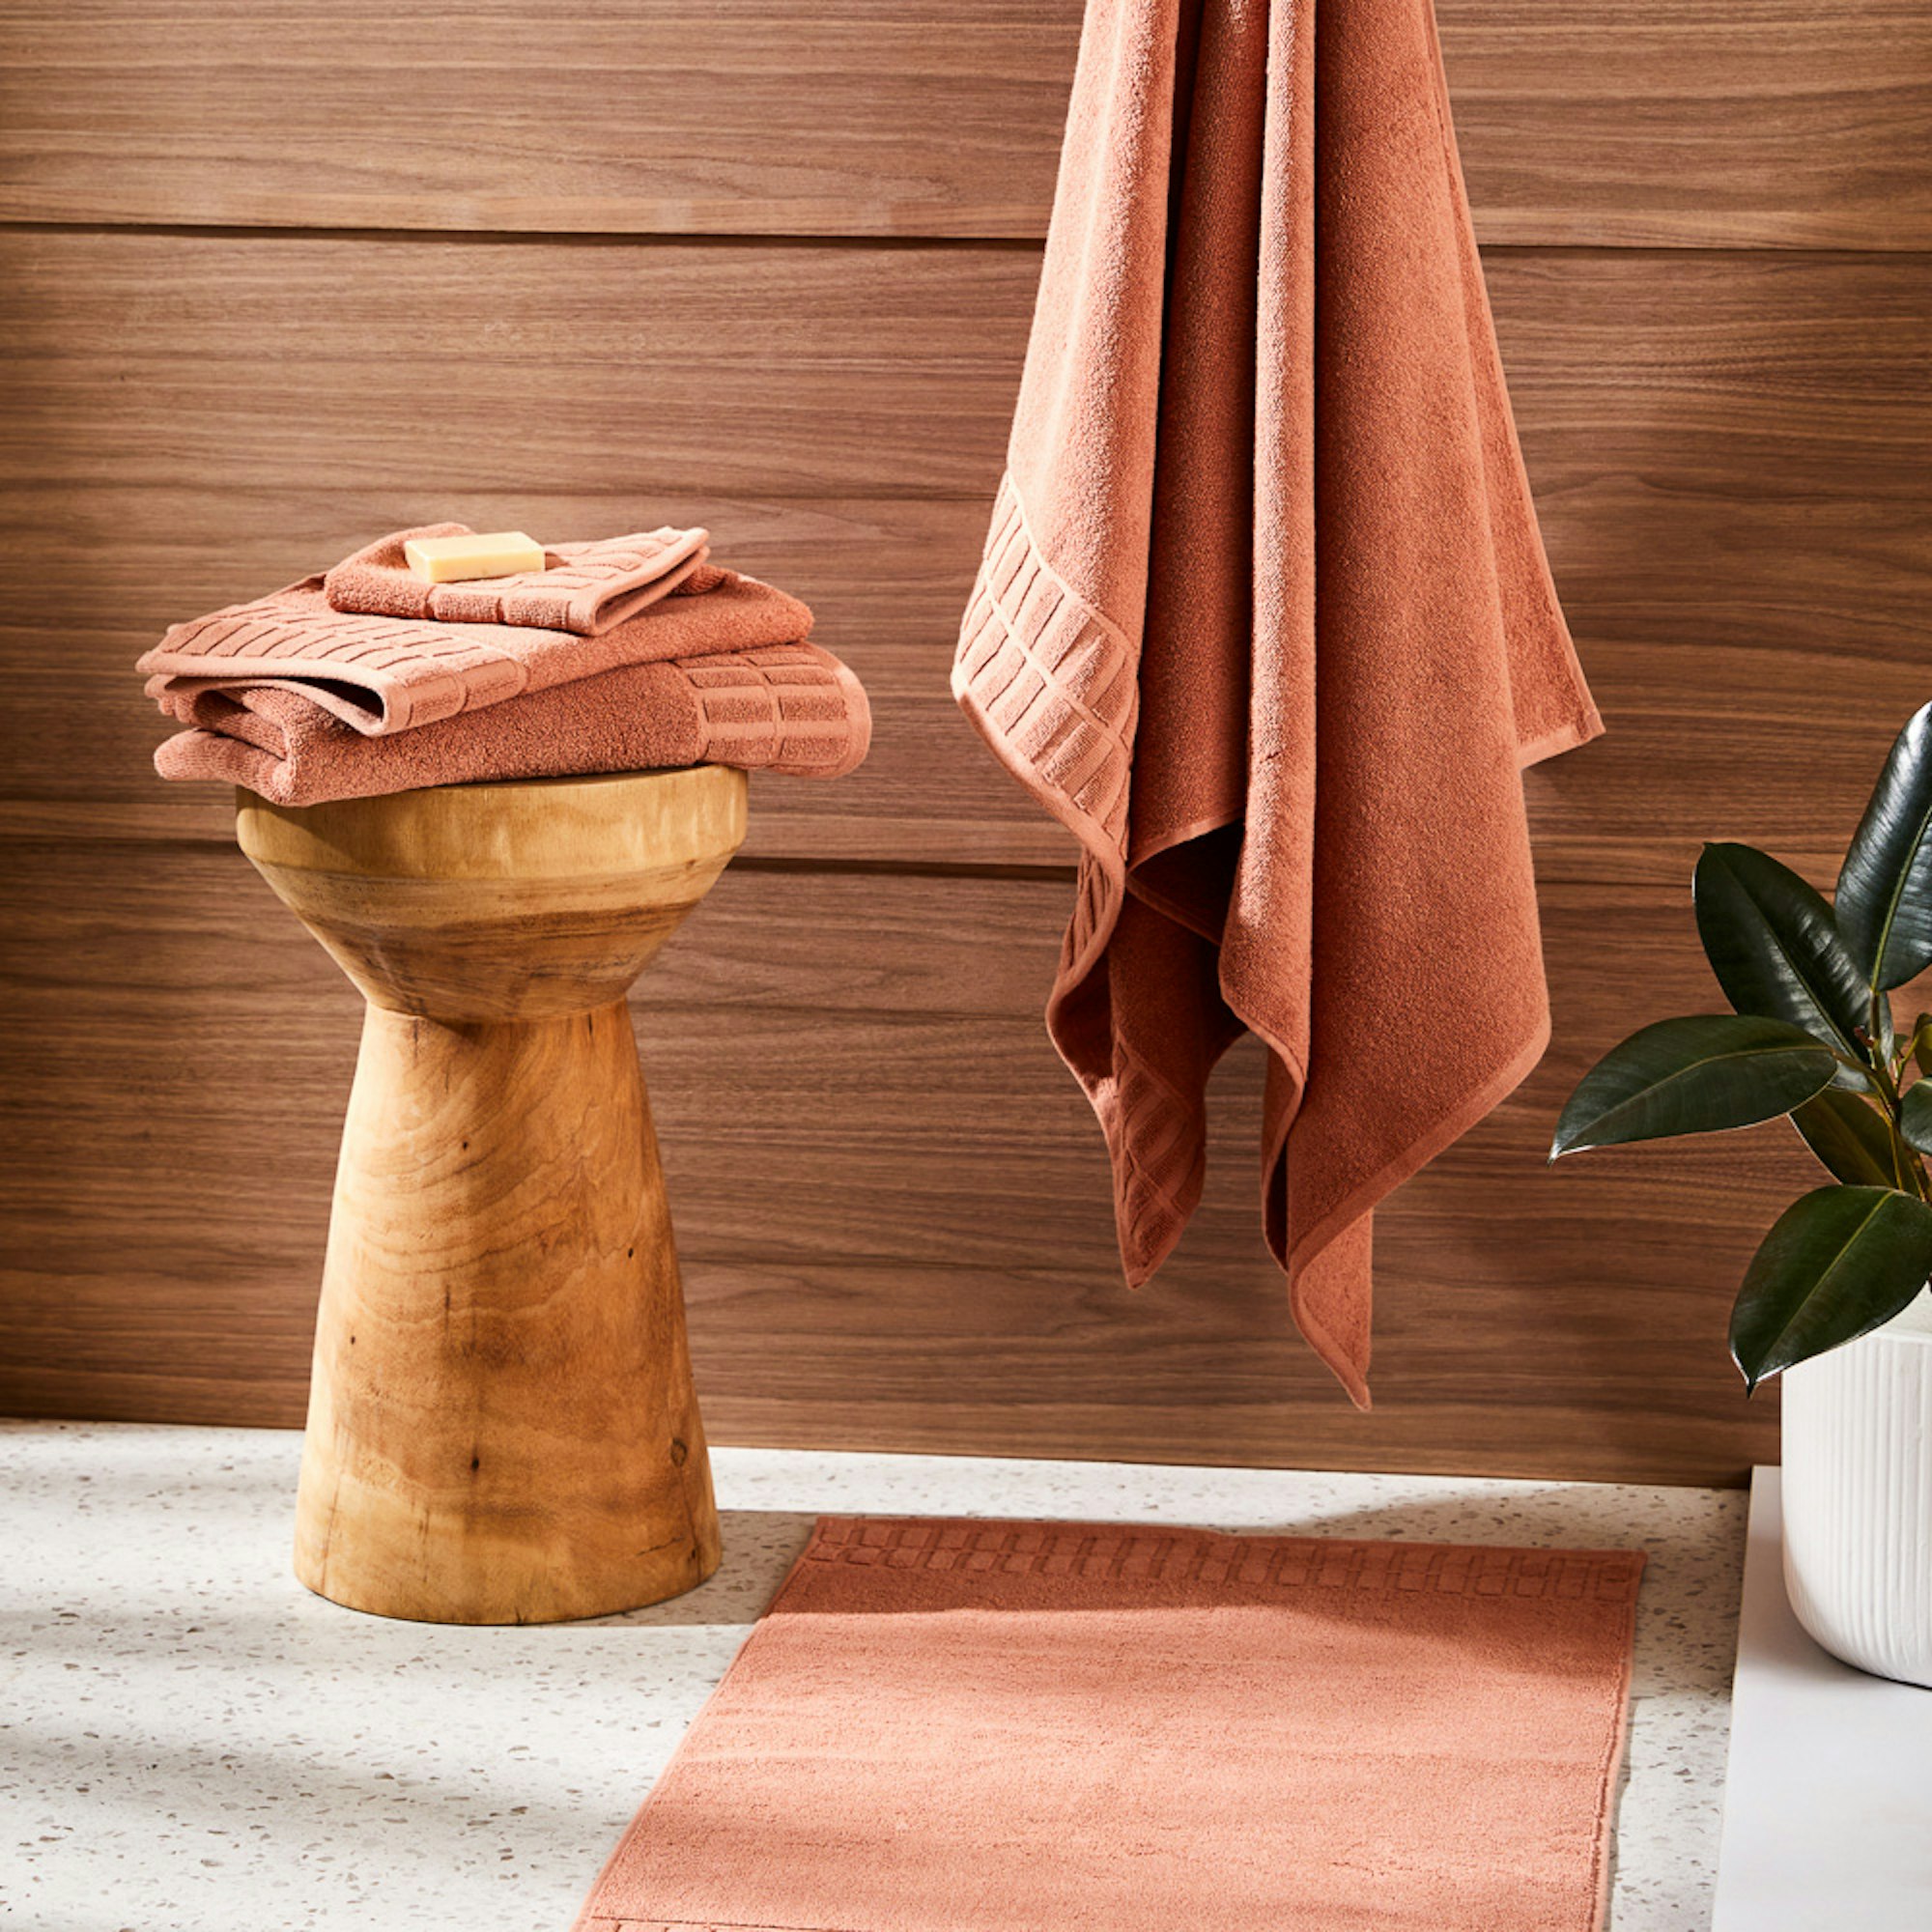 Bath towel collection in rust. Towel hanging from a hook with a stack of small towels on stool